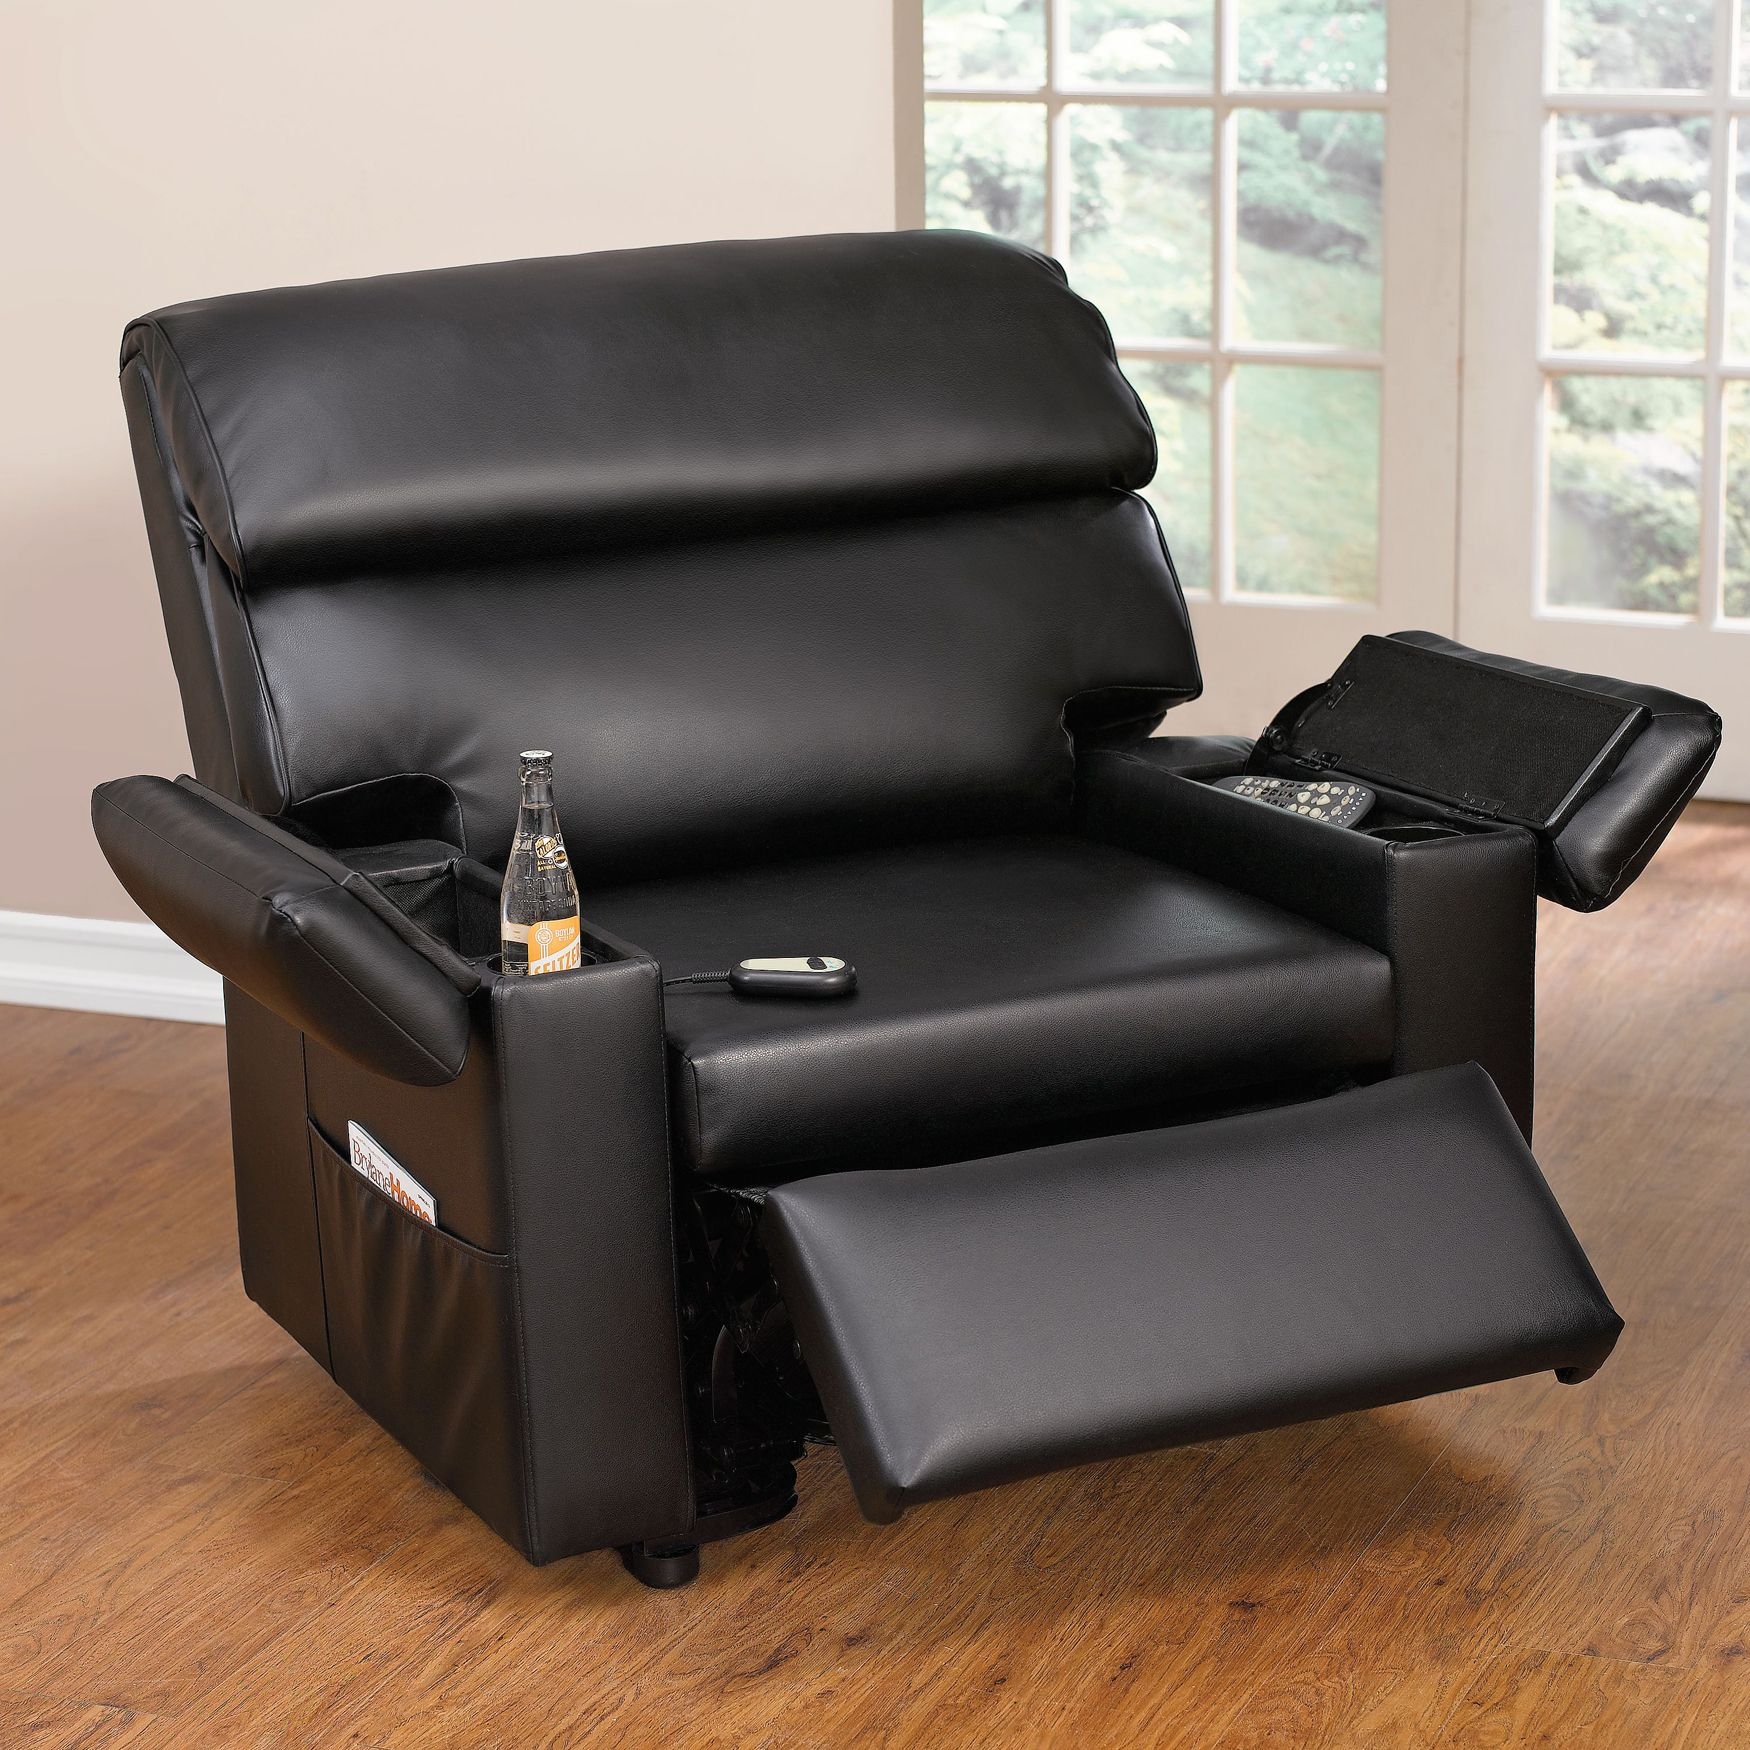 Plus+Size Living Brylanehome Extra Wide Leather-Look Power-Lift Chair With Storage Arms